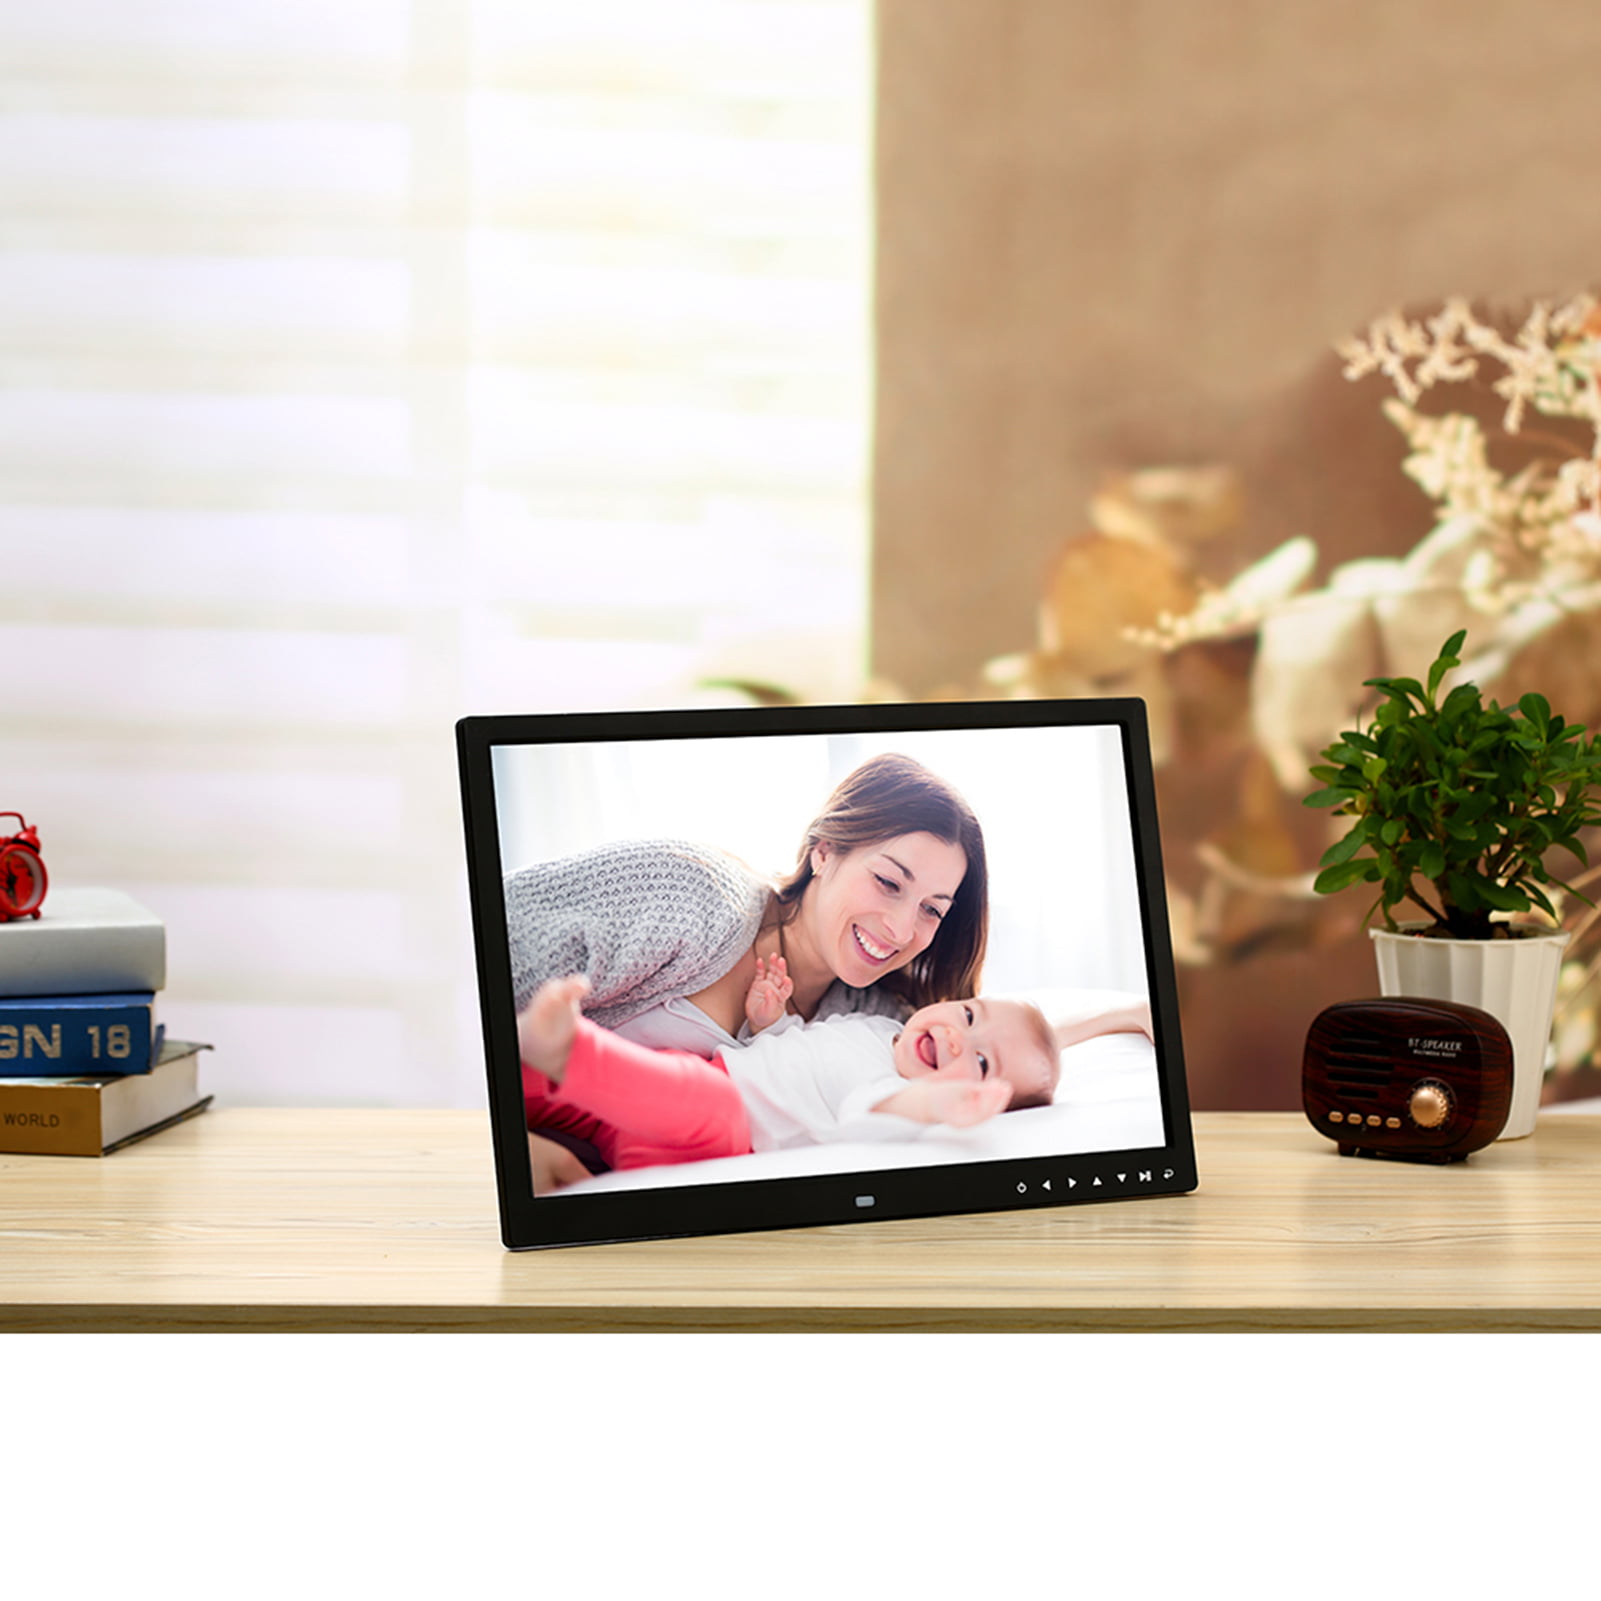 17 Inch Tft Screen Hd Led Backlight 1024 Energy Class A 768 Digital Photo Frame Electronic Album Picture Music Ultra-Thin Widescreen Full Format White